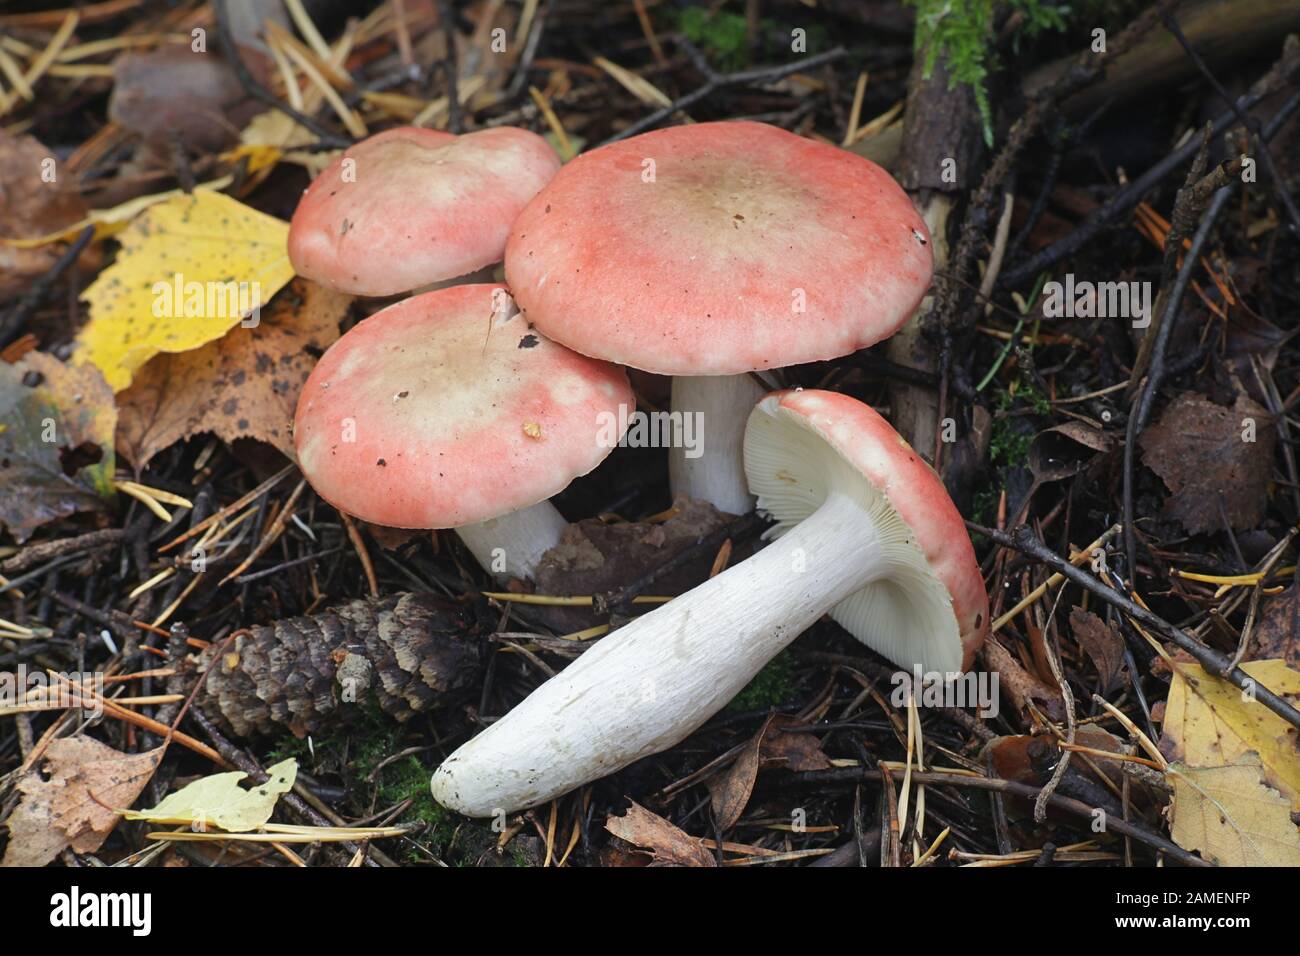 Russula depallens, known as bleached brittlegill, mushrooms from Finland Stock Photo